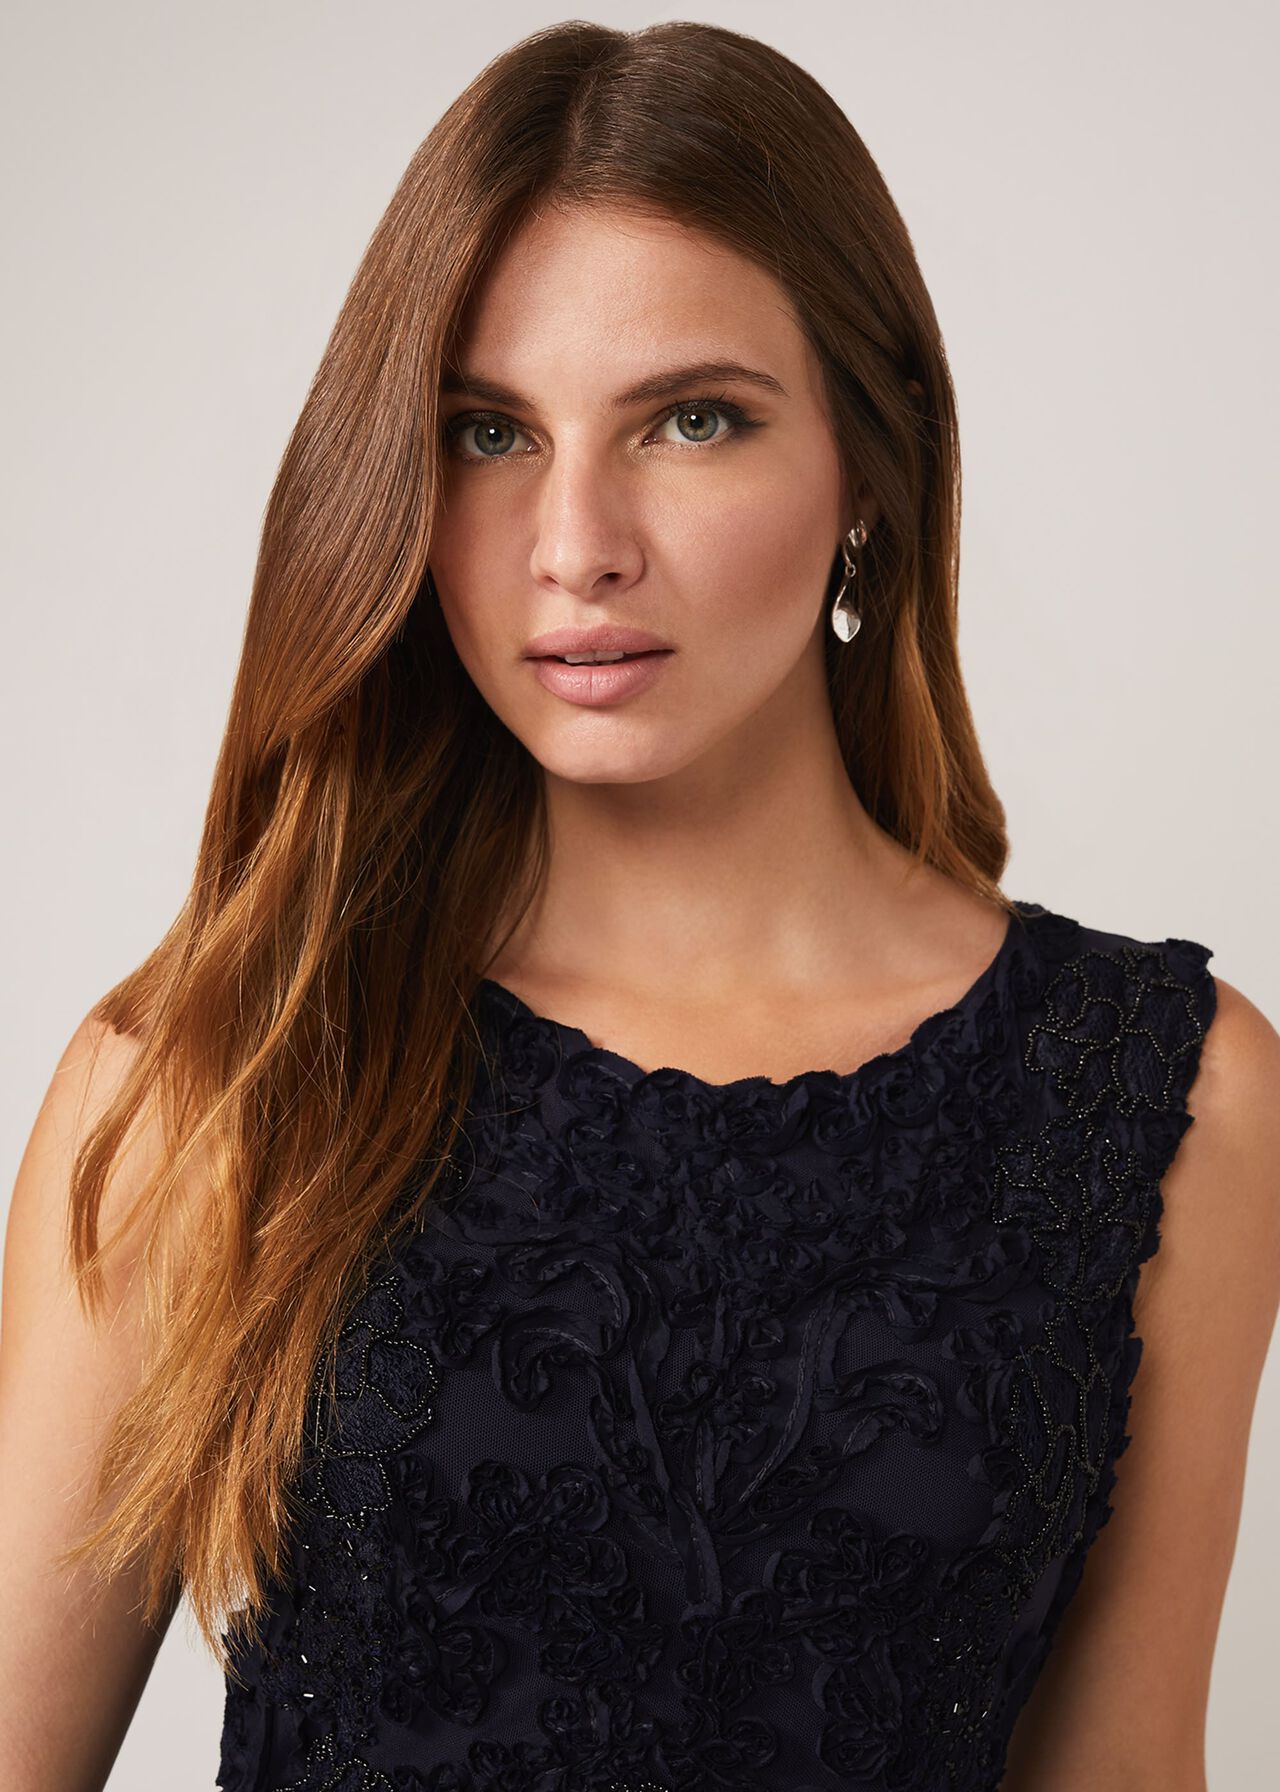 Penelope Tapework Lace Fit And Flare Dress